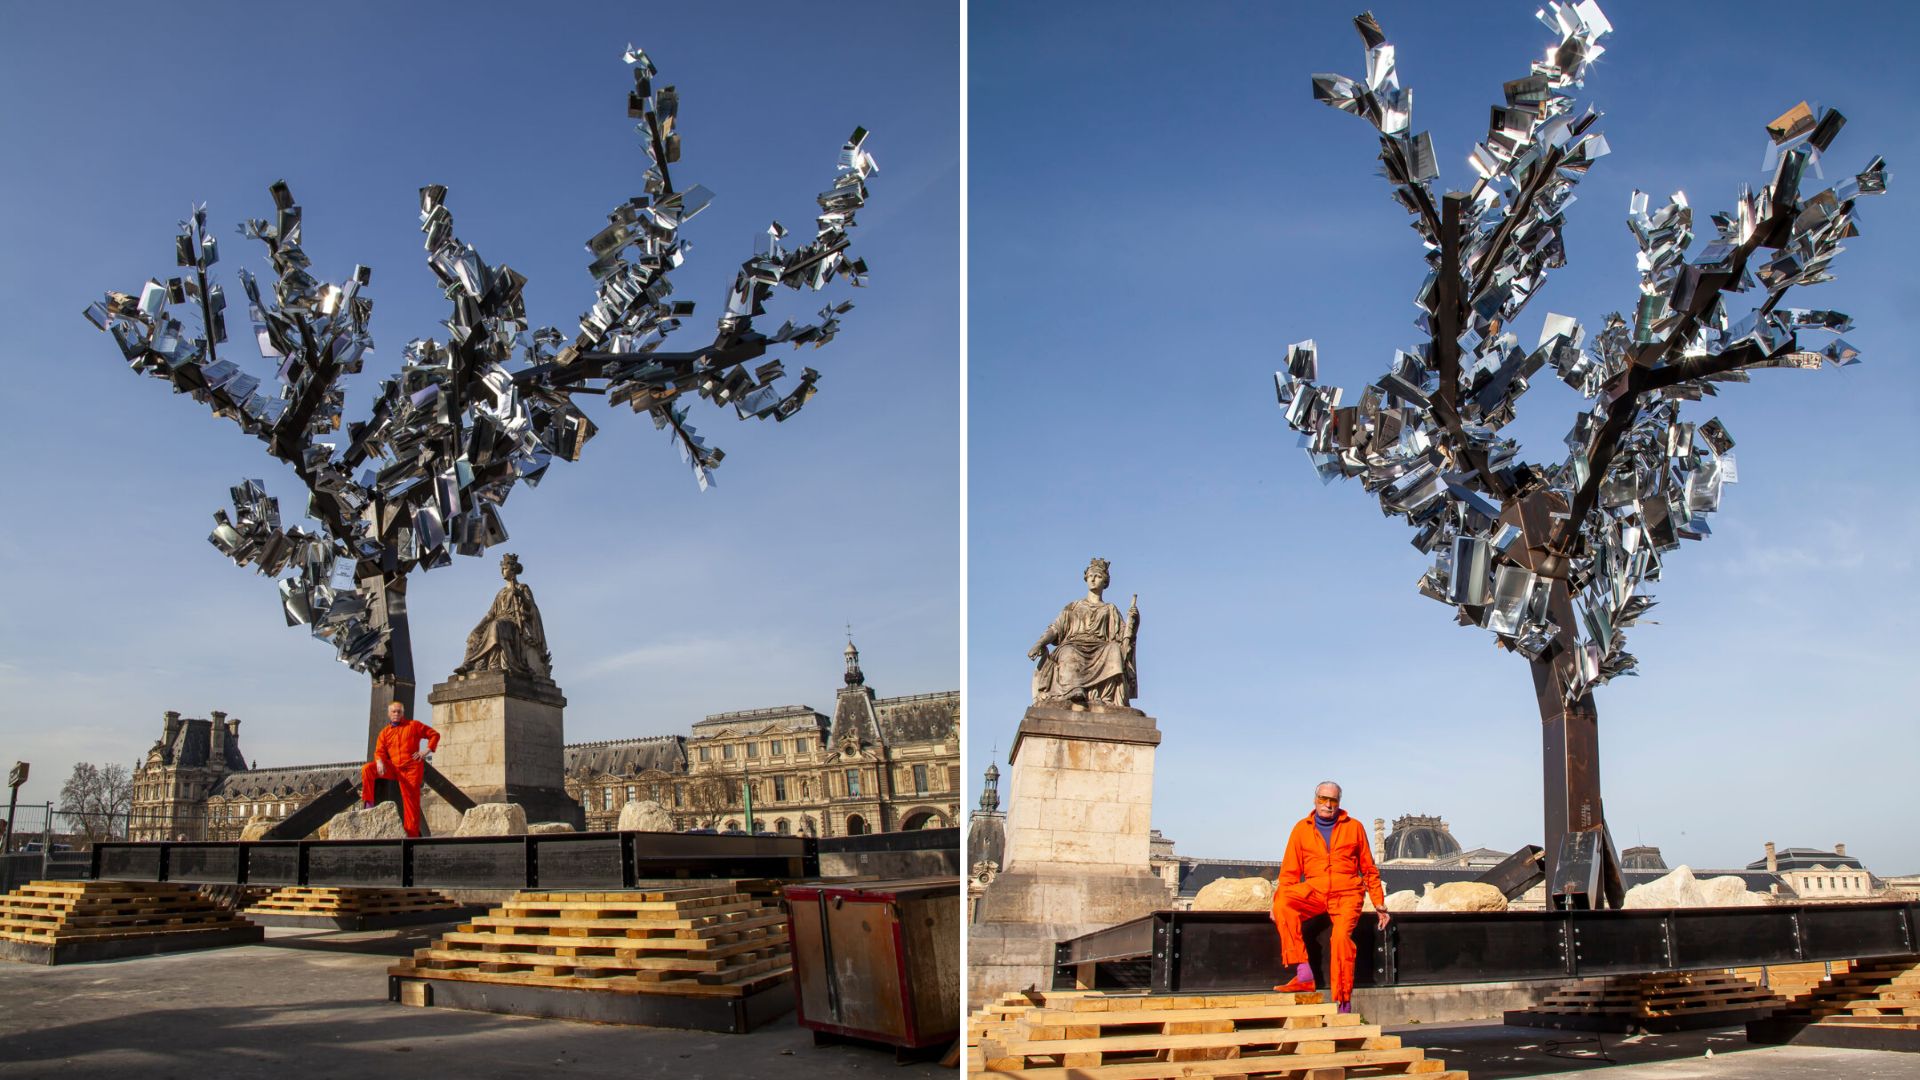 “The tree of a thousand voices”: an ephemeral open-air exhibition in the heart of Paris